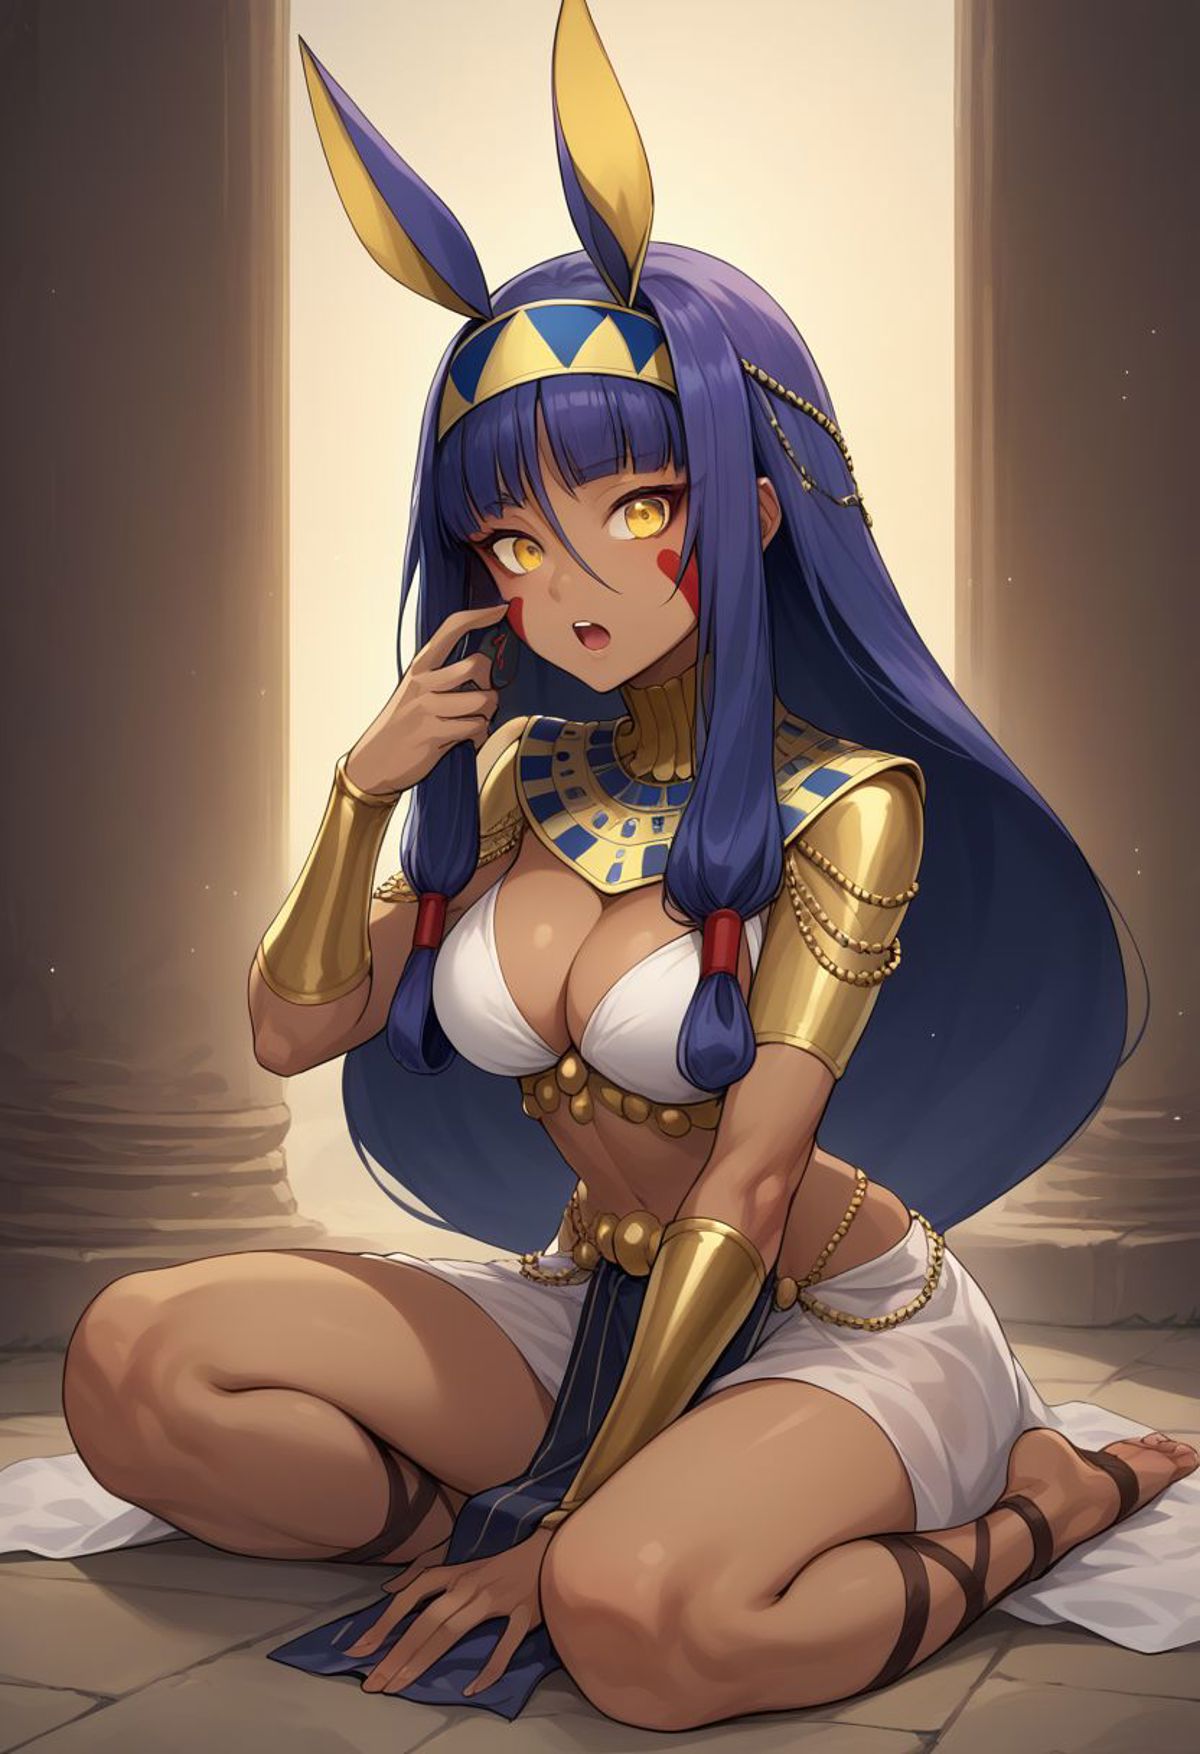 score_9, score_8_up, score_7_up, source_anime,
ancient egyptian clothes, cleavage, usekh collar, yellow eyes, open mouth, ...